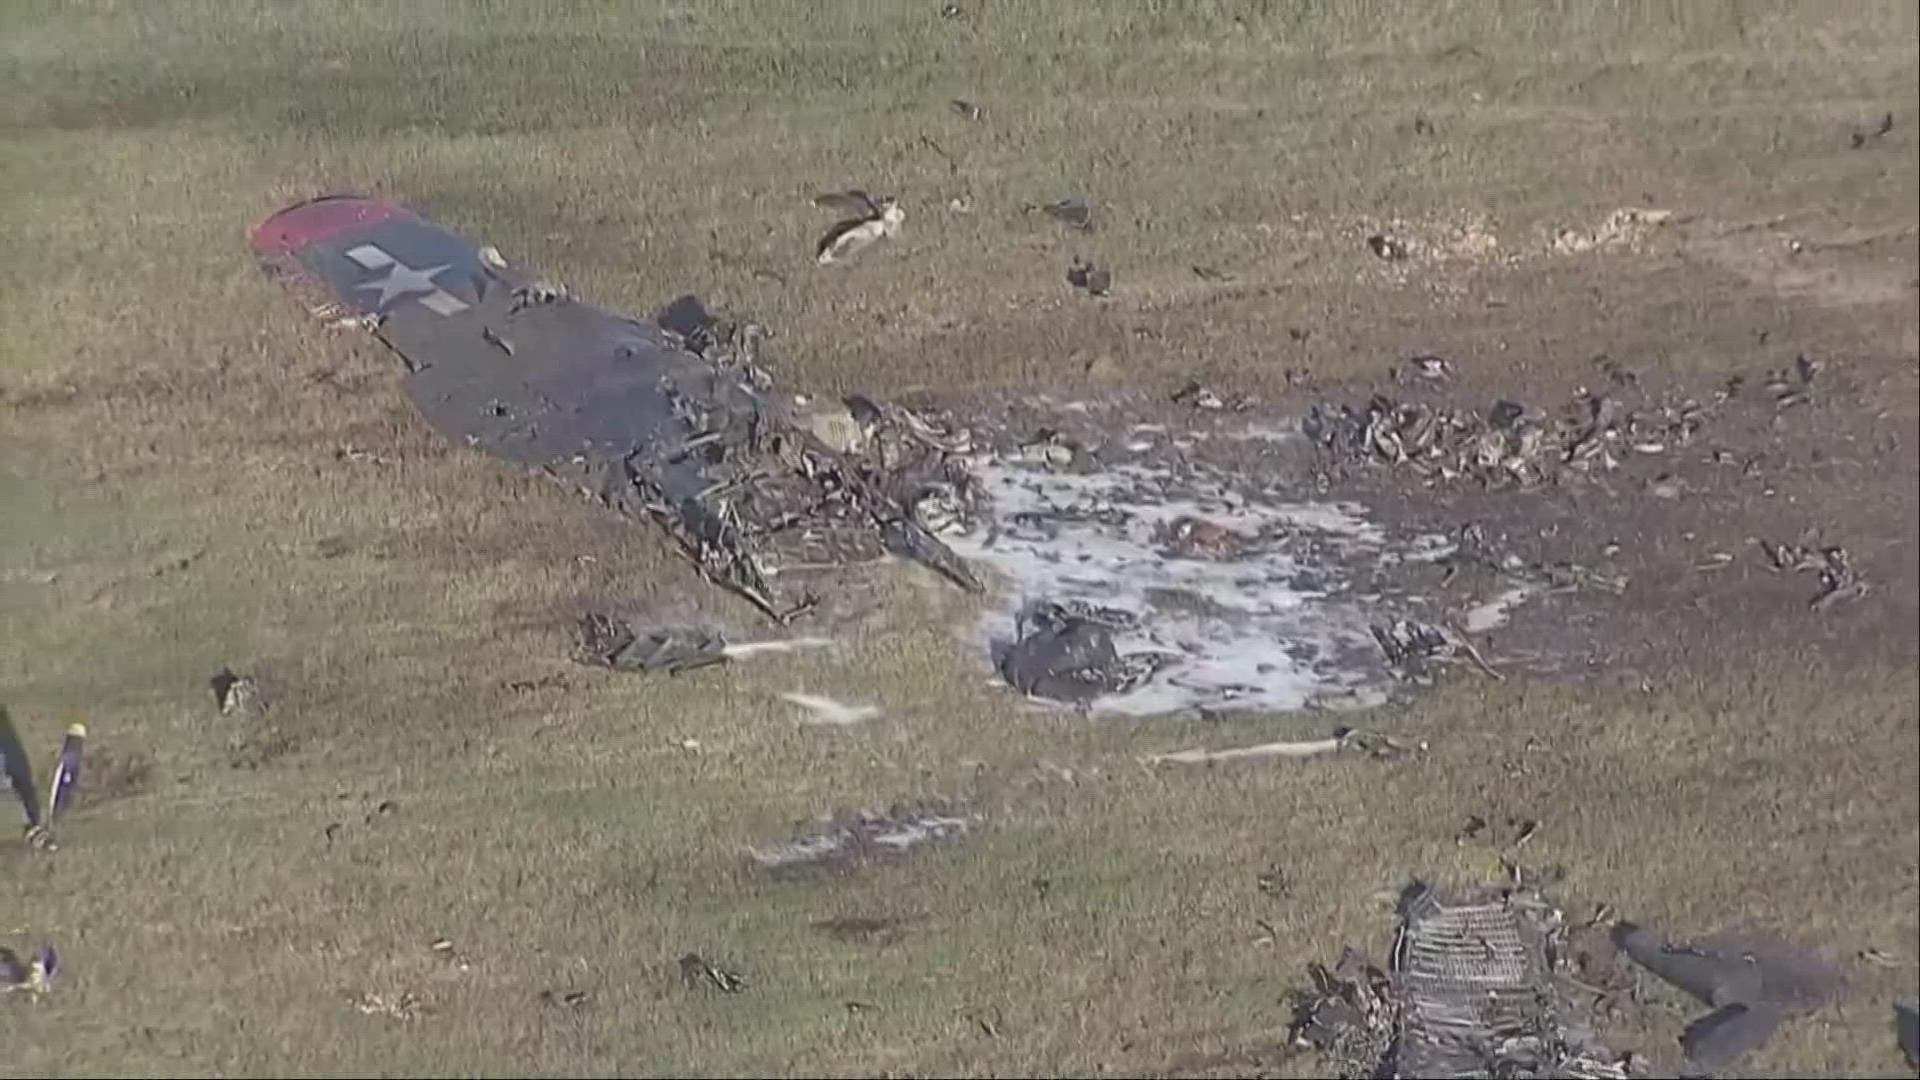 The Boeing B-17 Flying Fortress and a Bell P-63 Kingcobra collided and crashed around 1:20 p.m., the Federal Aviation Administration (FAA) said in a statement.